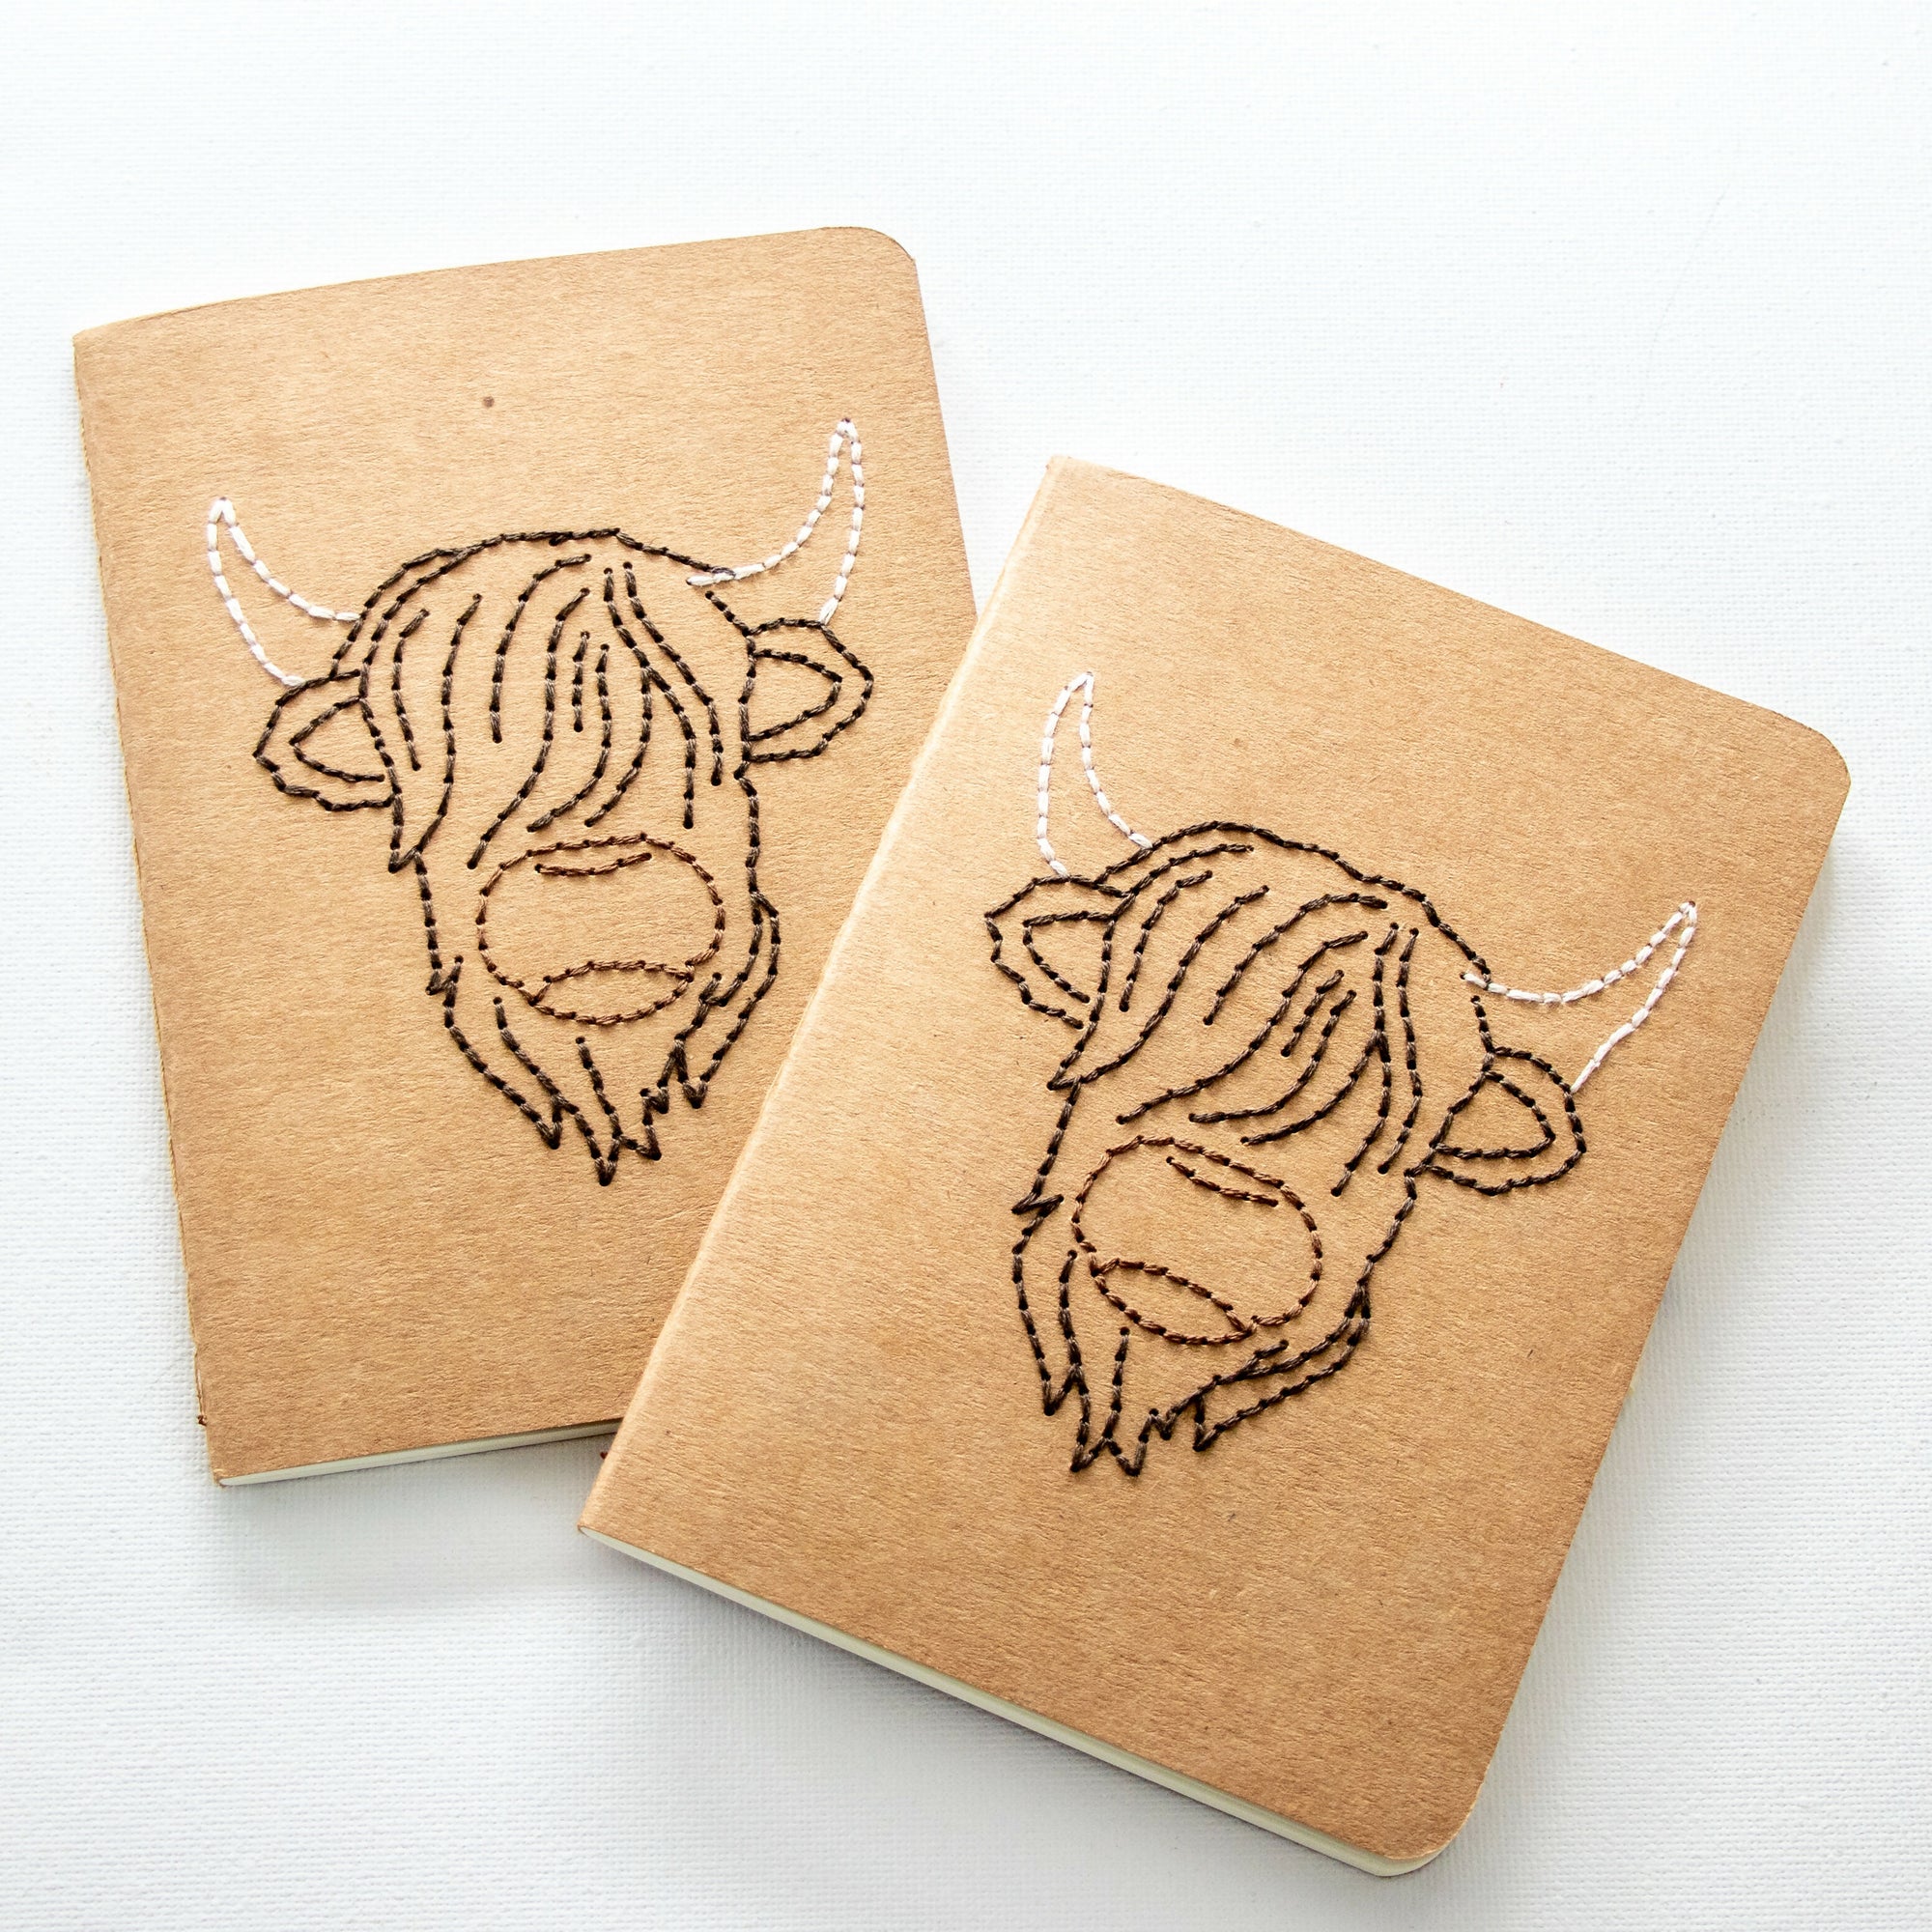 Created by LDBankey | Hand Stitched Highland Cow Notebooks with neutral decorative paper